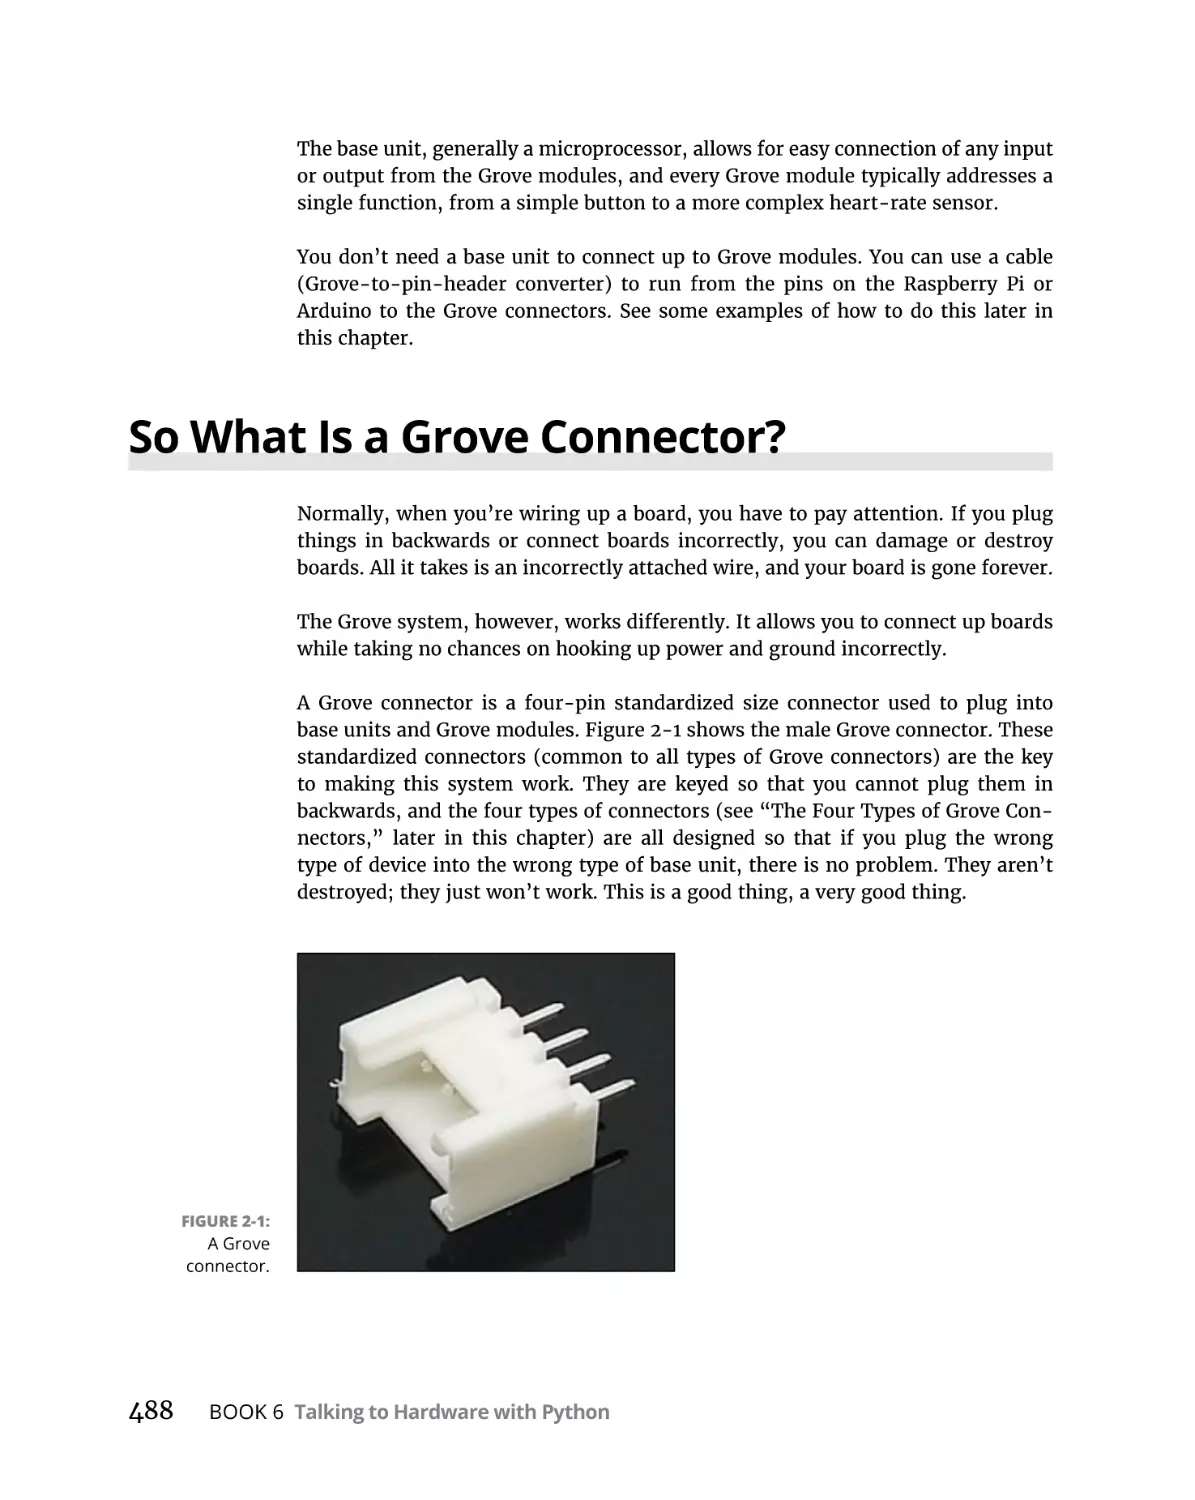 So What Is a Grove Connector?